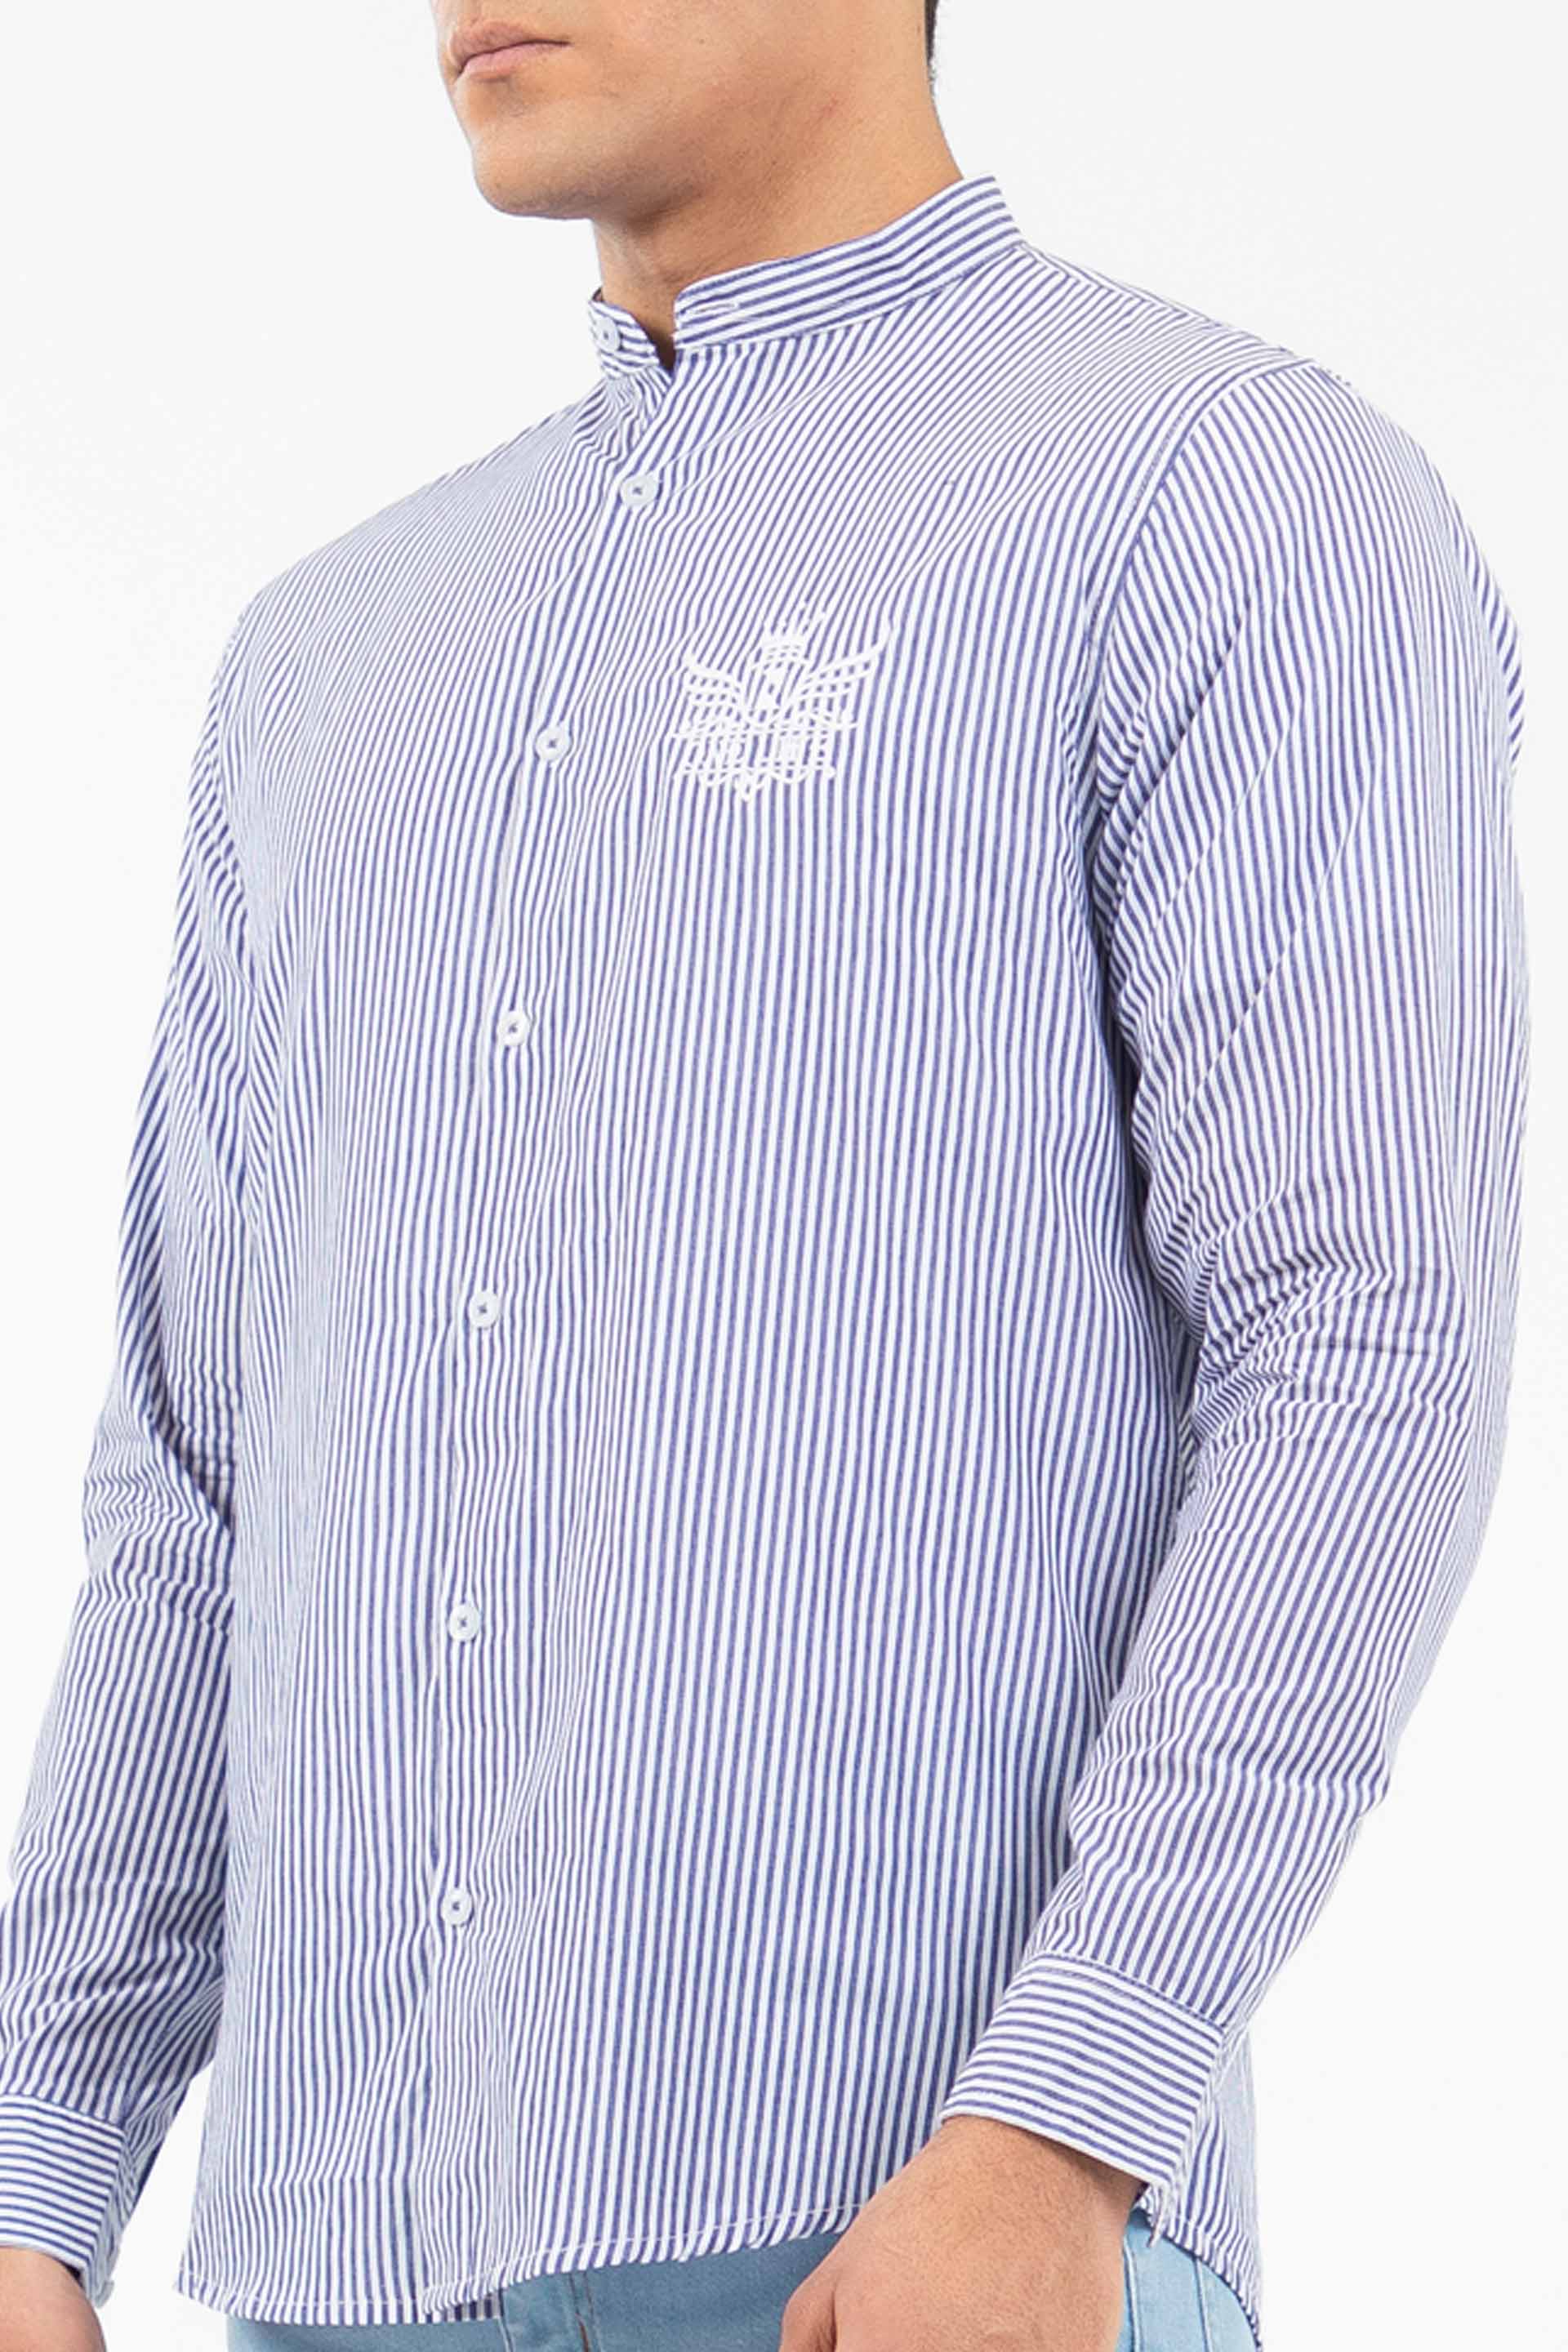 Embroidery Shirt Navy/White